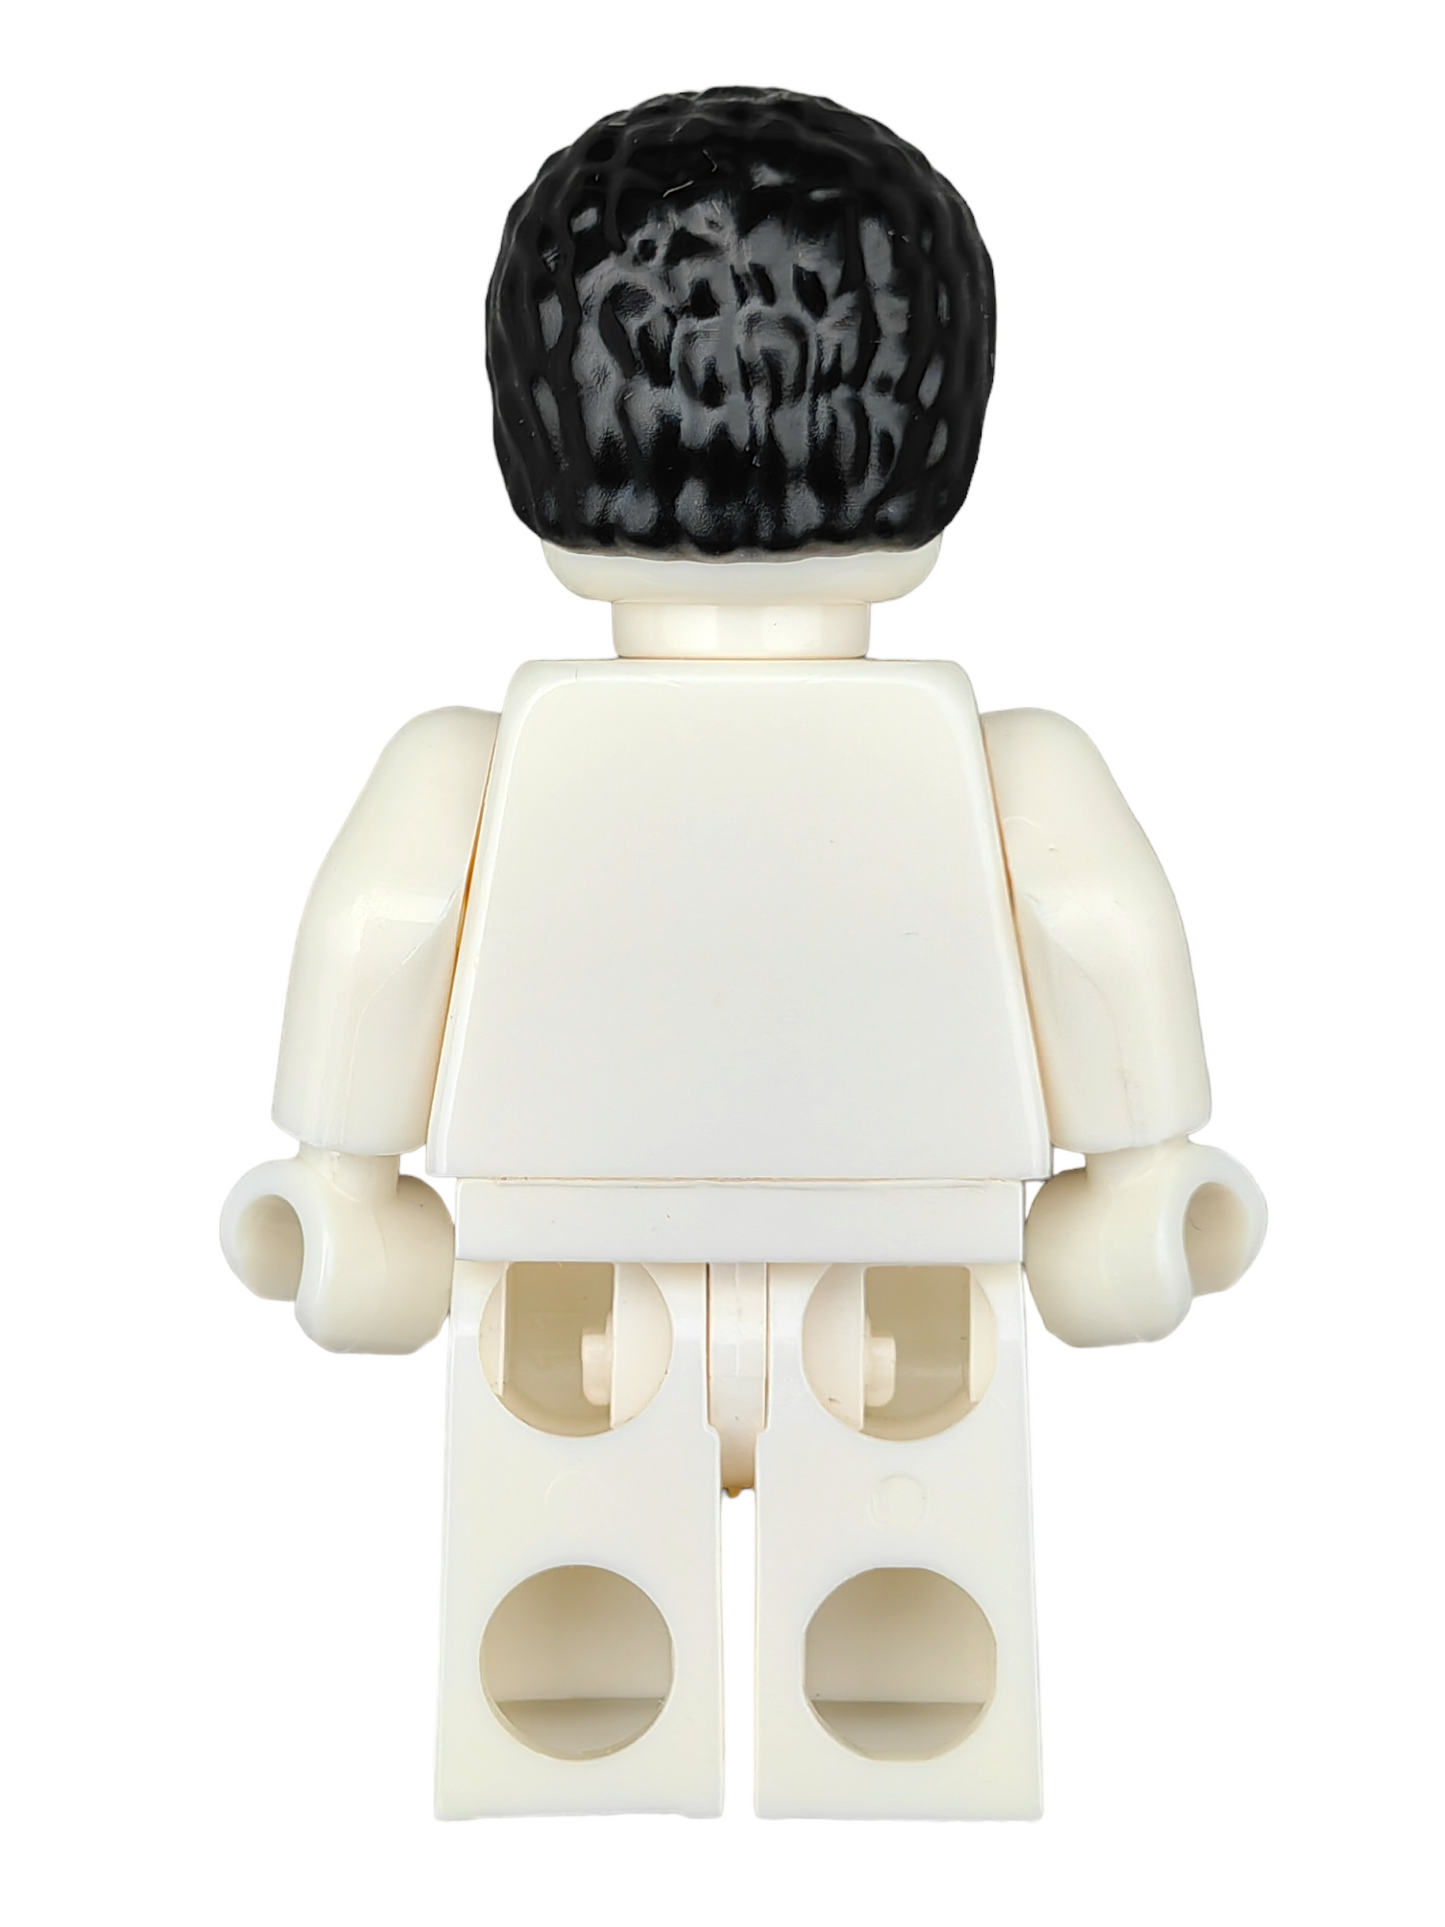 LEGO Wig, Black Hair , Coiled with Straight Sides - UB1191